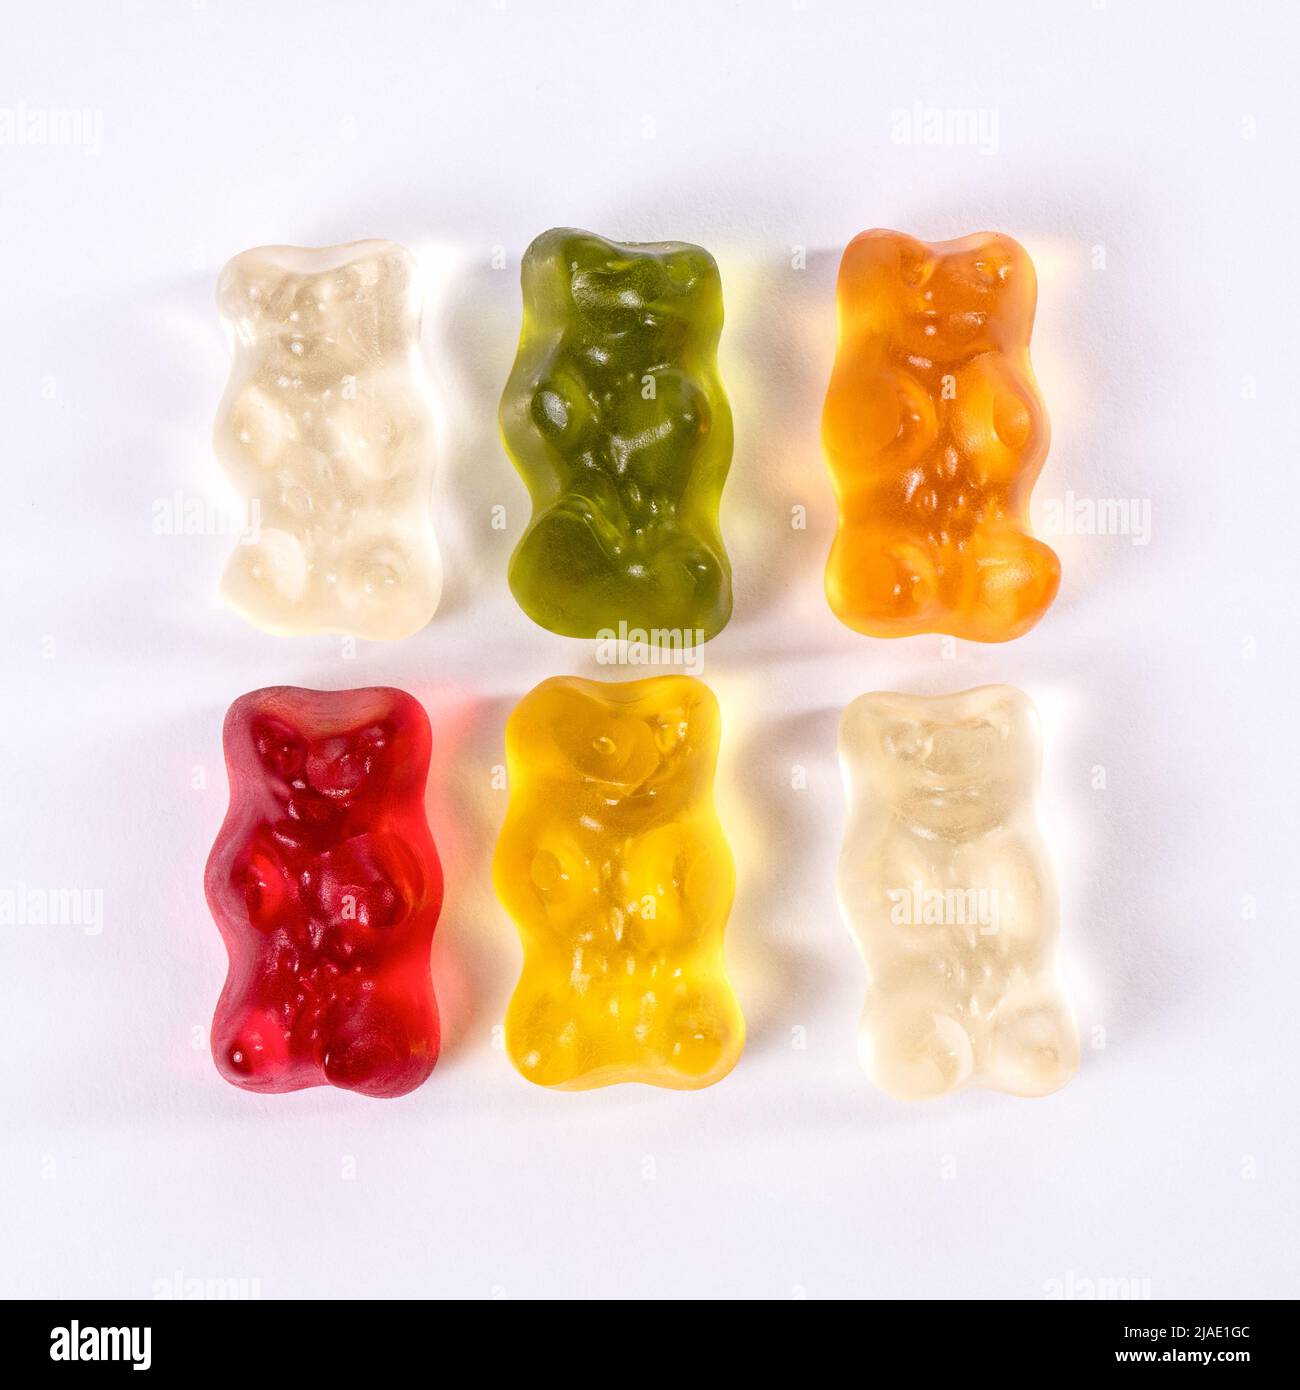 Gummy bears on a white background. Sweets and unhealthy food. Stock Photo